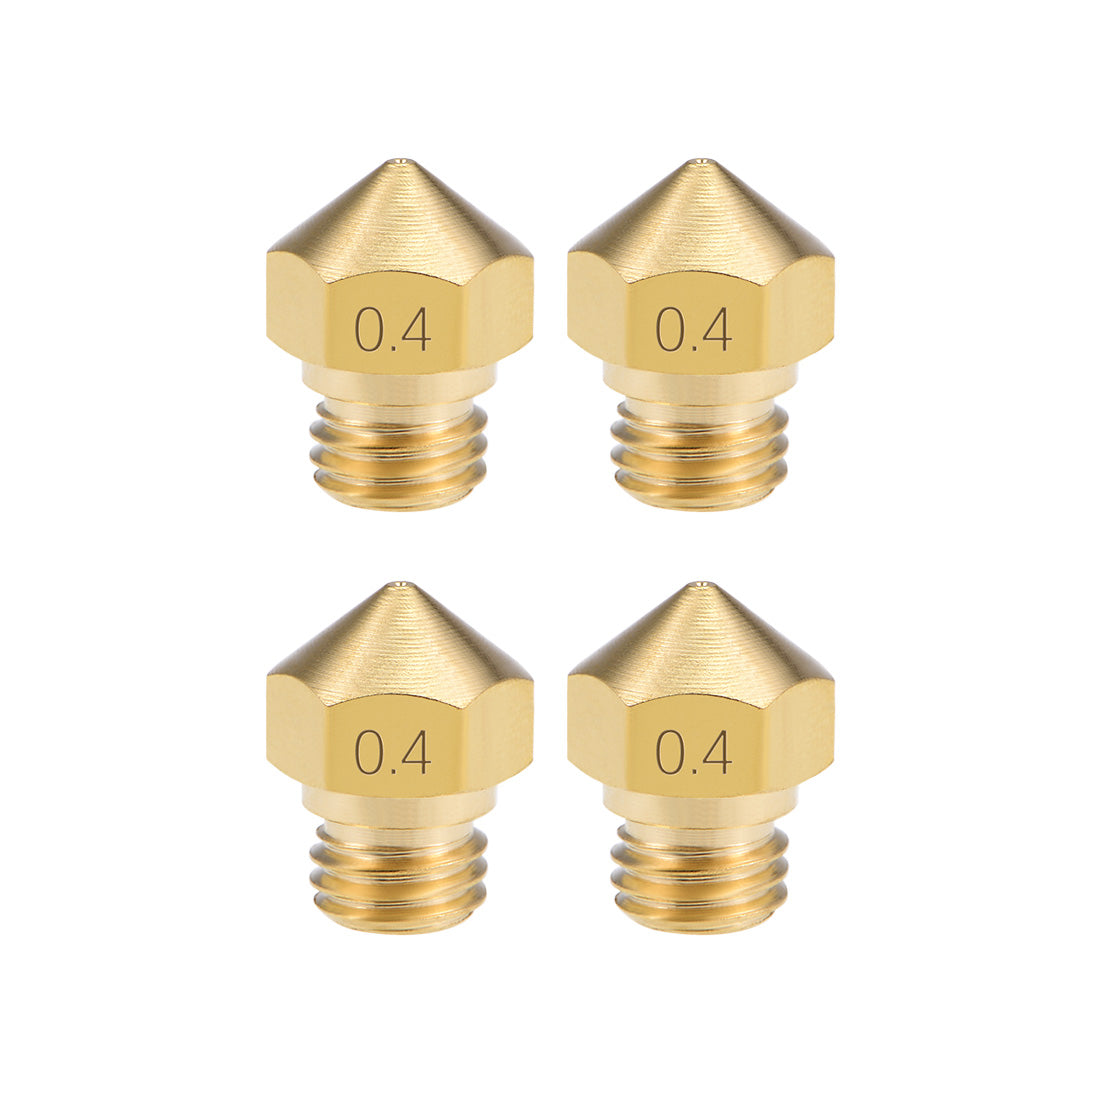 uxcell Uxcell 0.4mm 3D Printer Nozzle Head M7 Thread Replacement for MK10 1.75mm Extruder Print, Brass 4pcs